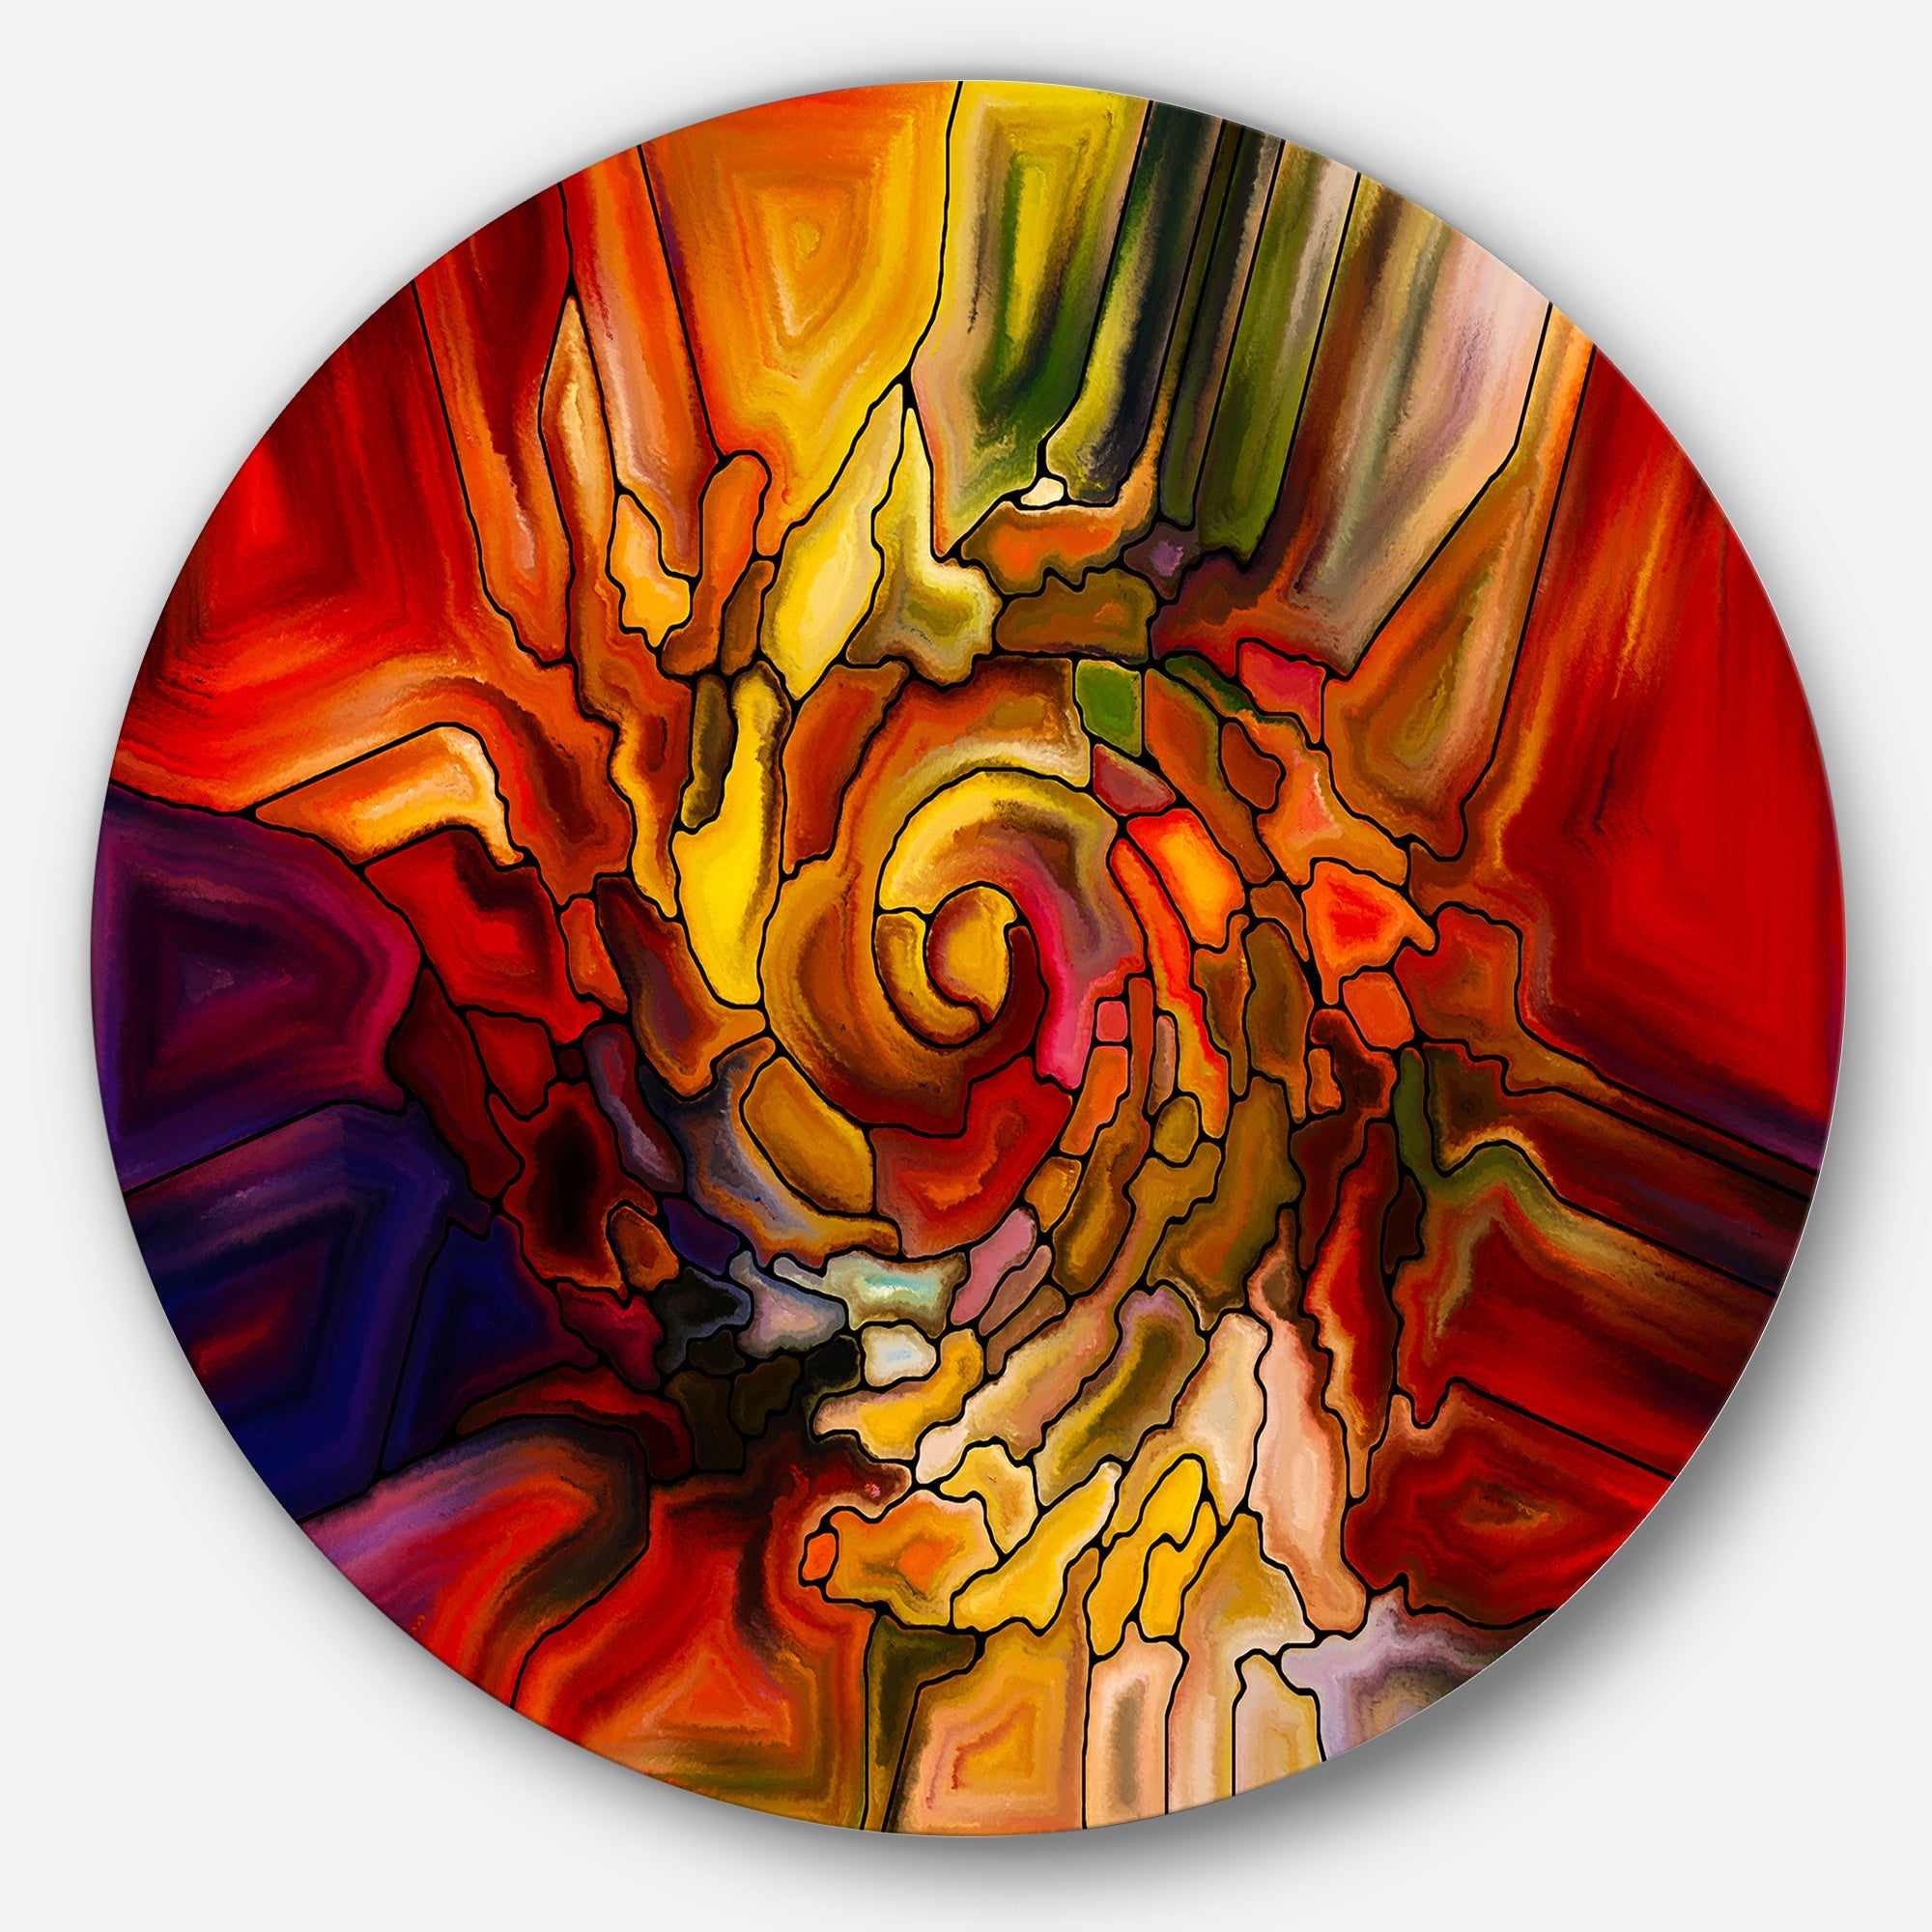 Illusions of Stained Glass Abstract Metal Artwork